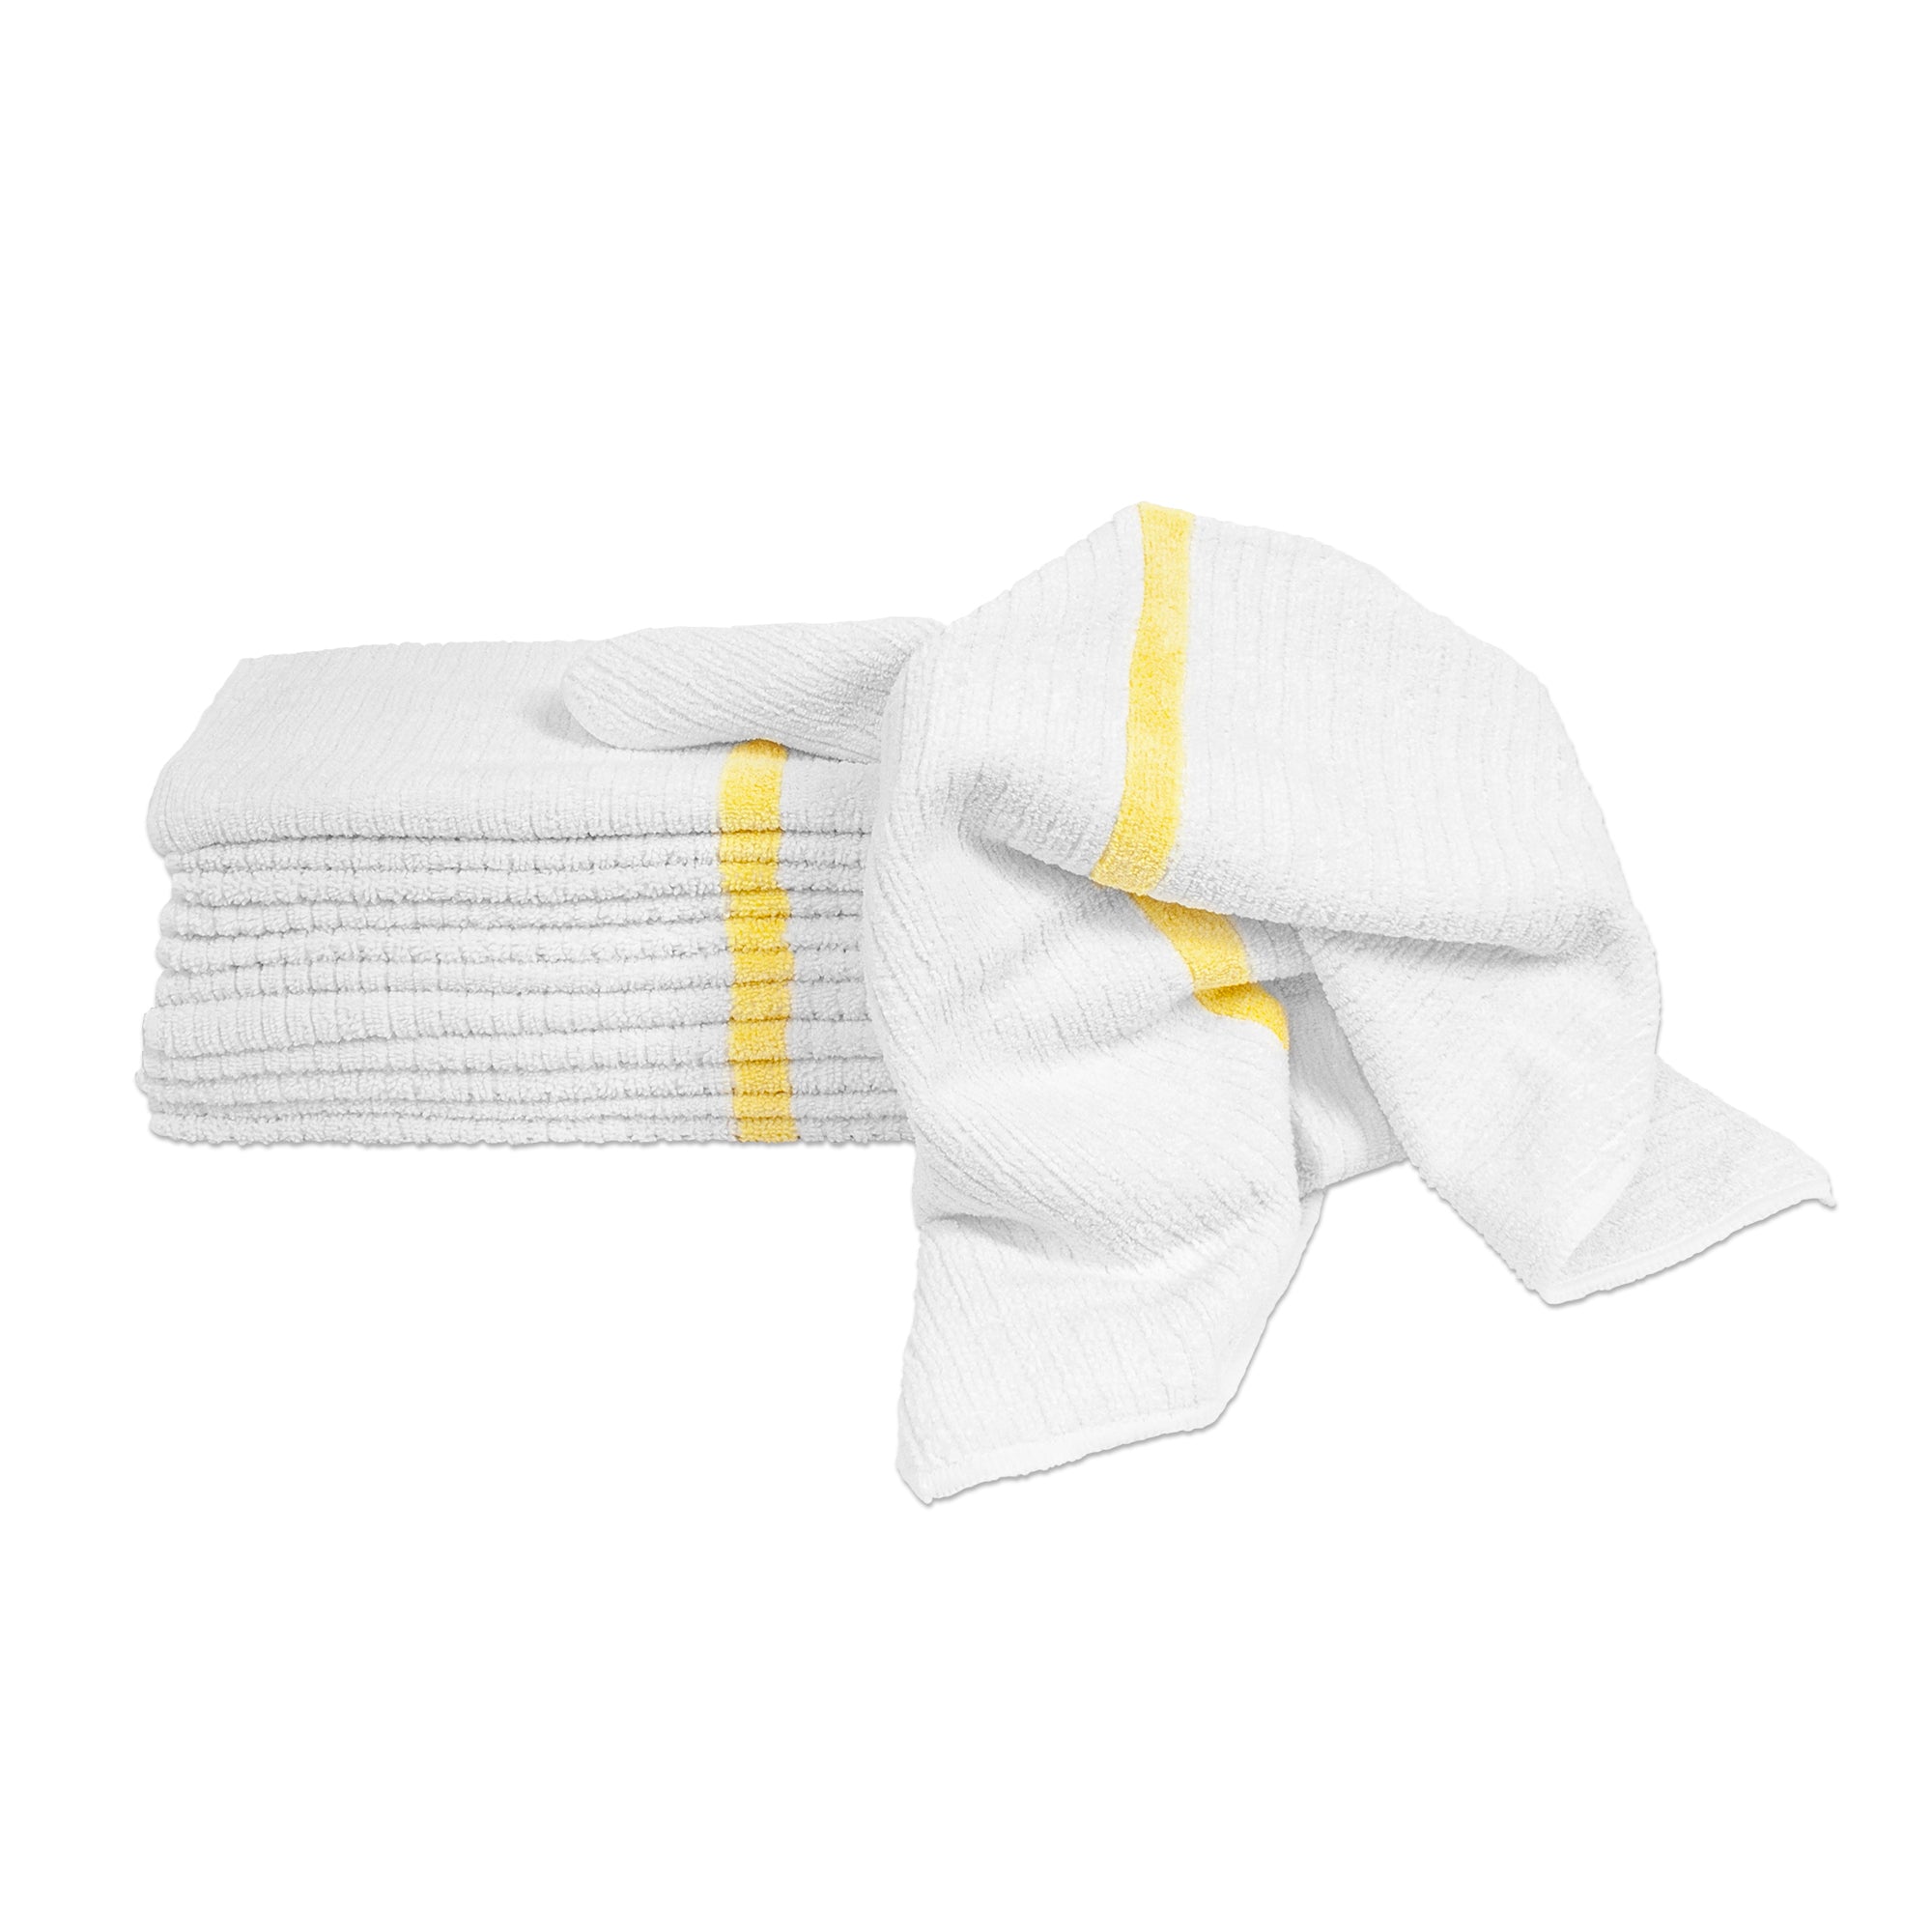 Nouvelle Legende Ribbed Microfiber Bar Towel, White with Green